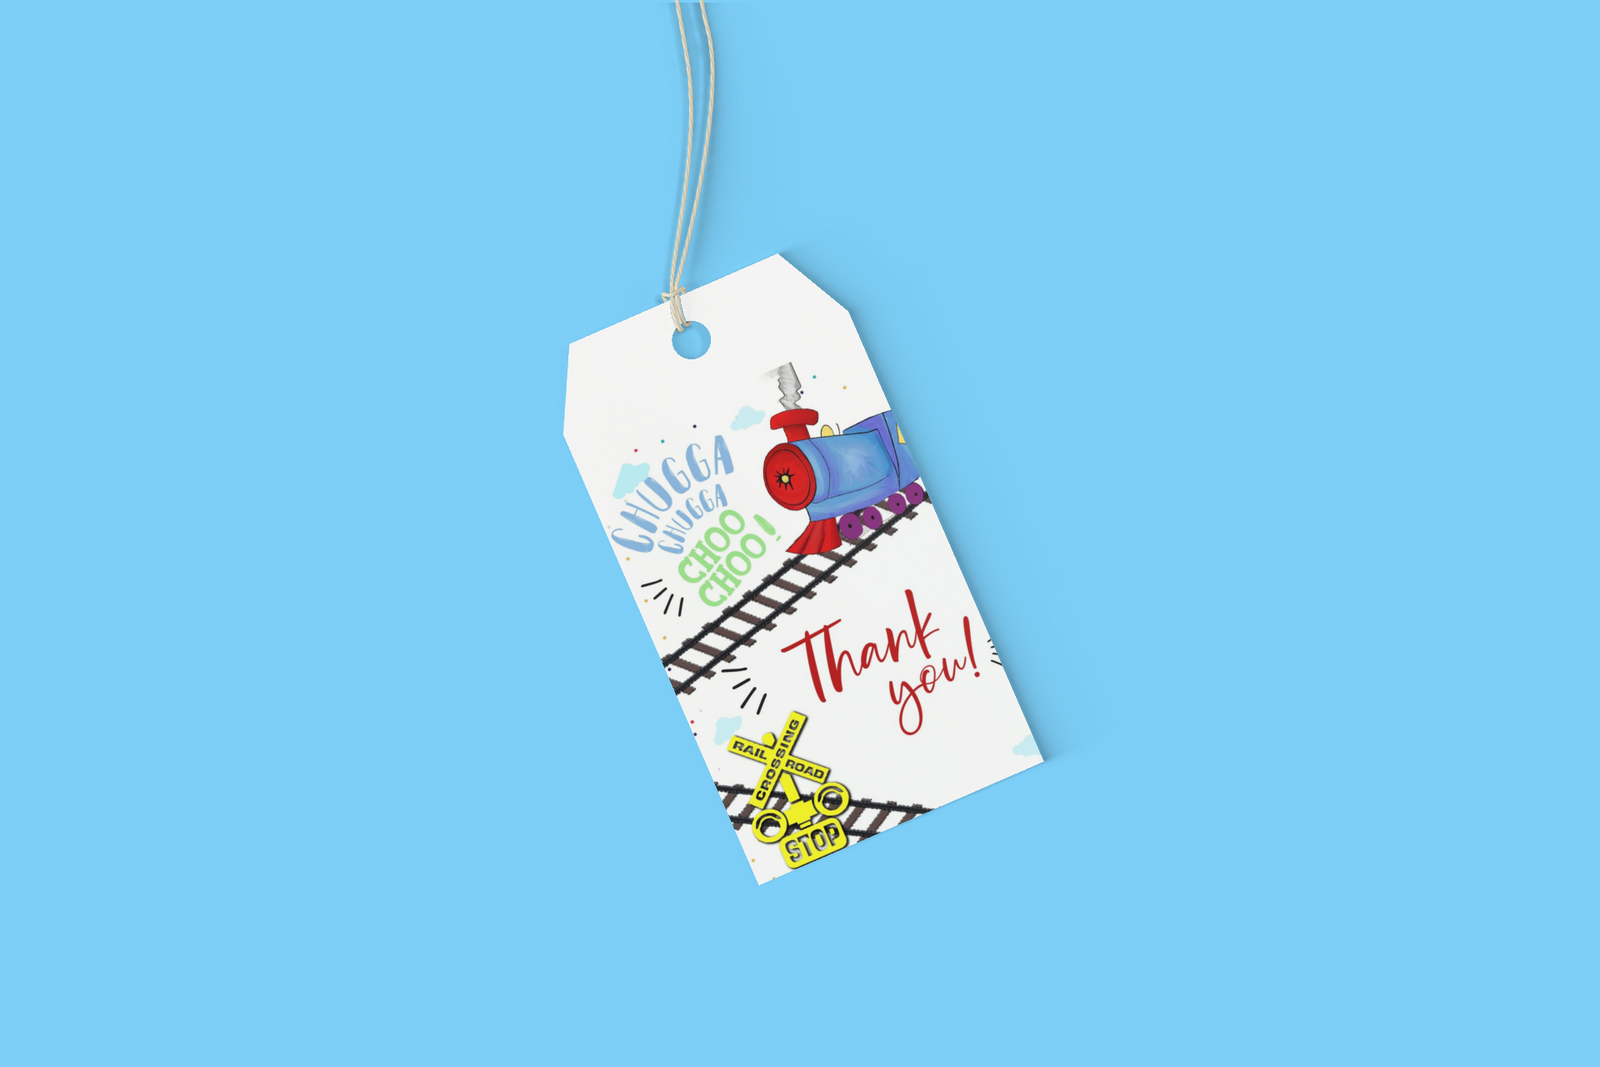 Train Theme Model 2 Birthday Favour Tags (2 x 3.5 inches/250 GSM Cardstock/Multicolour/30Pcs)